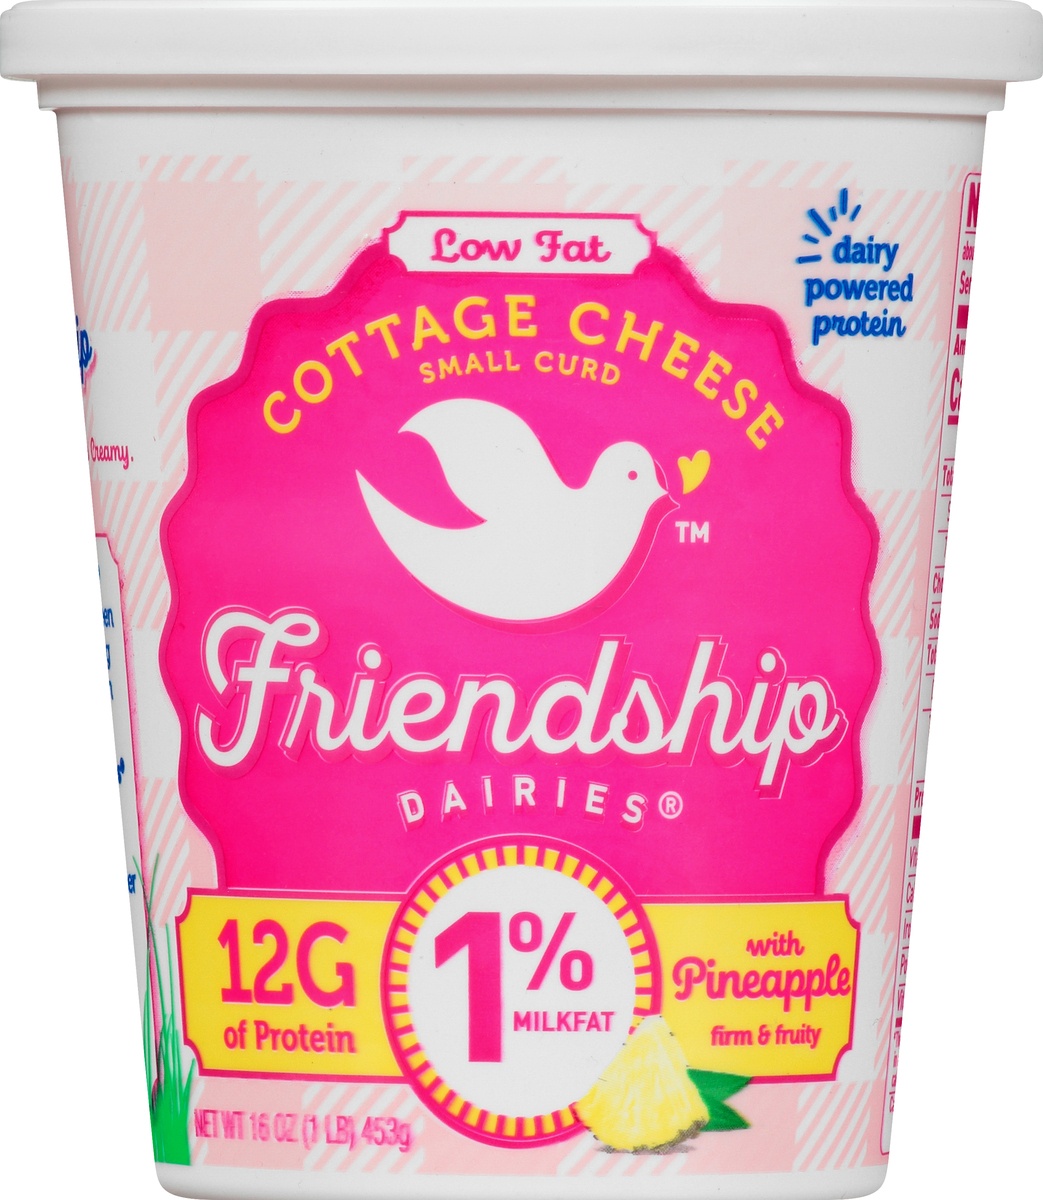 slide 9 of 10, Friendship Dairies 1% Milkfat Cottage Cheese With Pineapple, 16 oz